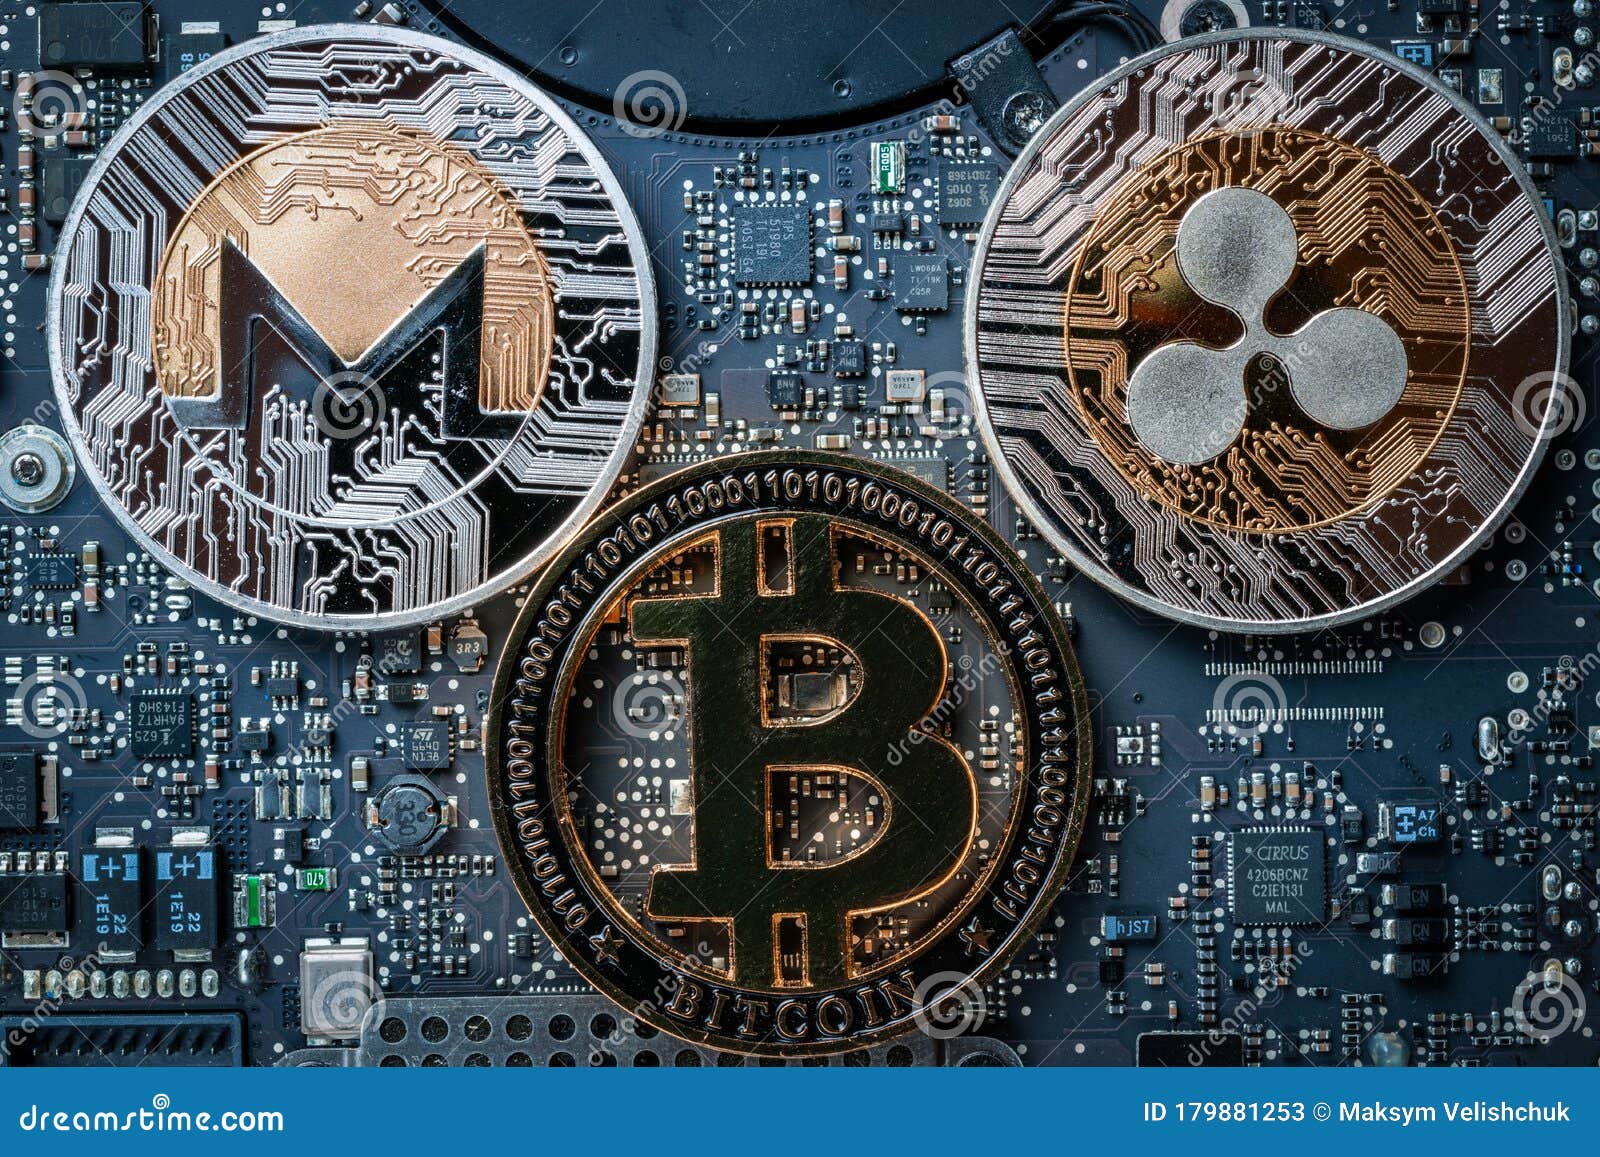 cryptocurrency board